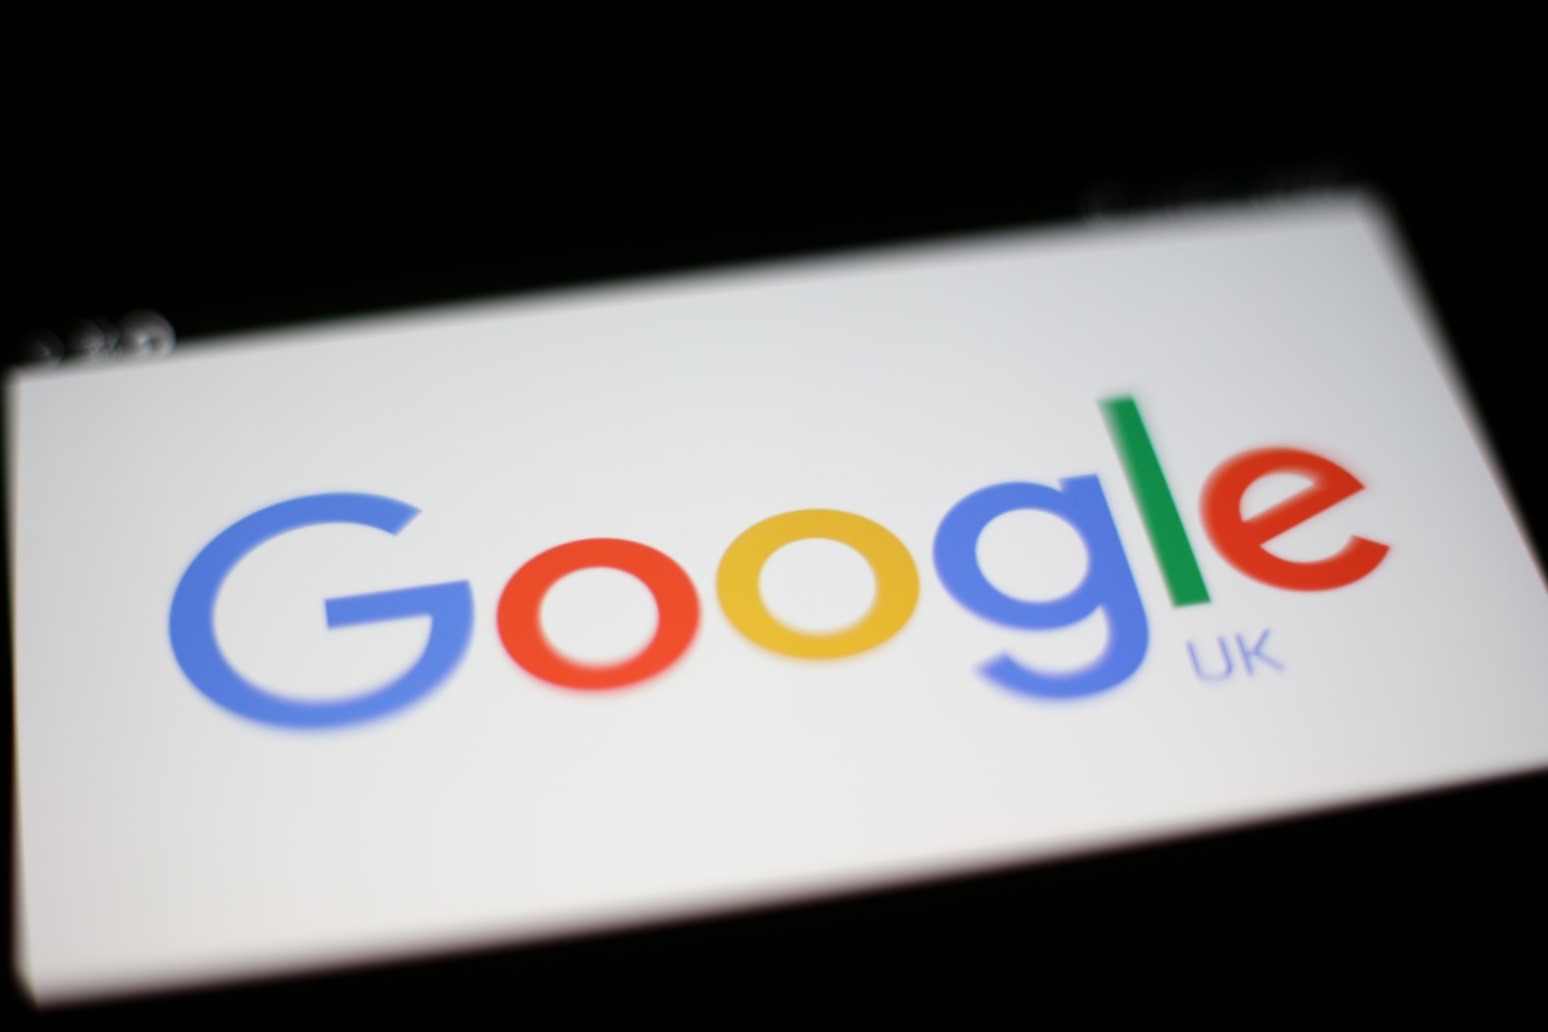 Google announces £762m investment to buy UK office site 